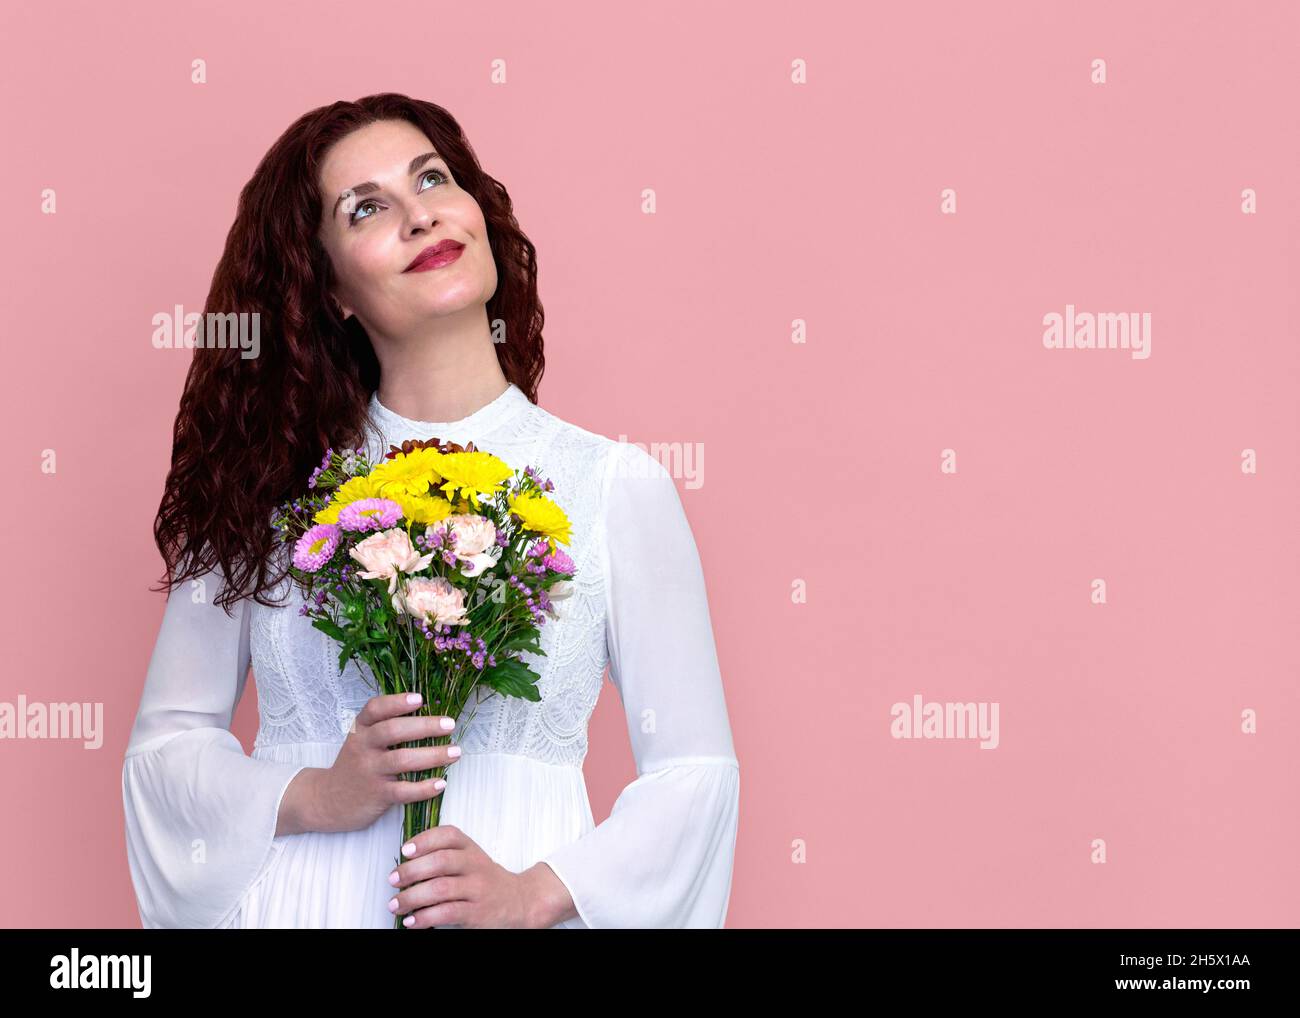 Woman Holding Flowers Looking Up with Soft Smile on Pink Background. Close-up portrait of beautiful happy woman in white dress holding bouquet. Stock Photo